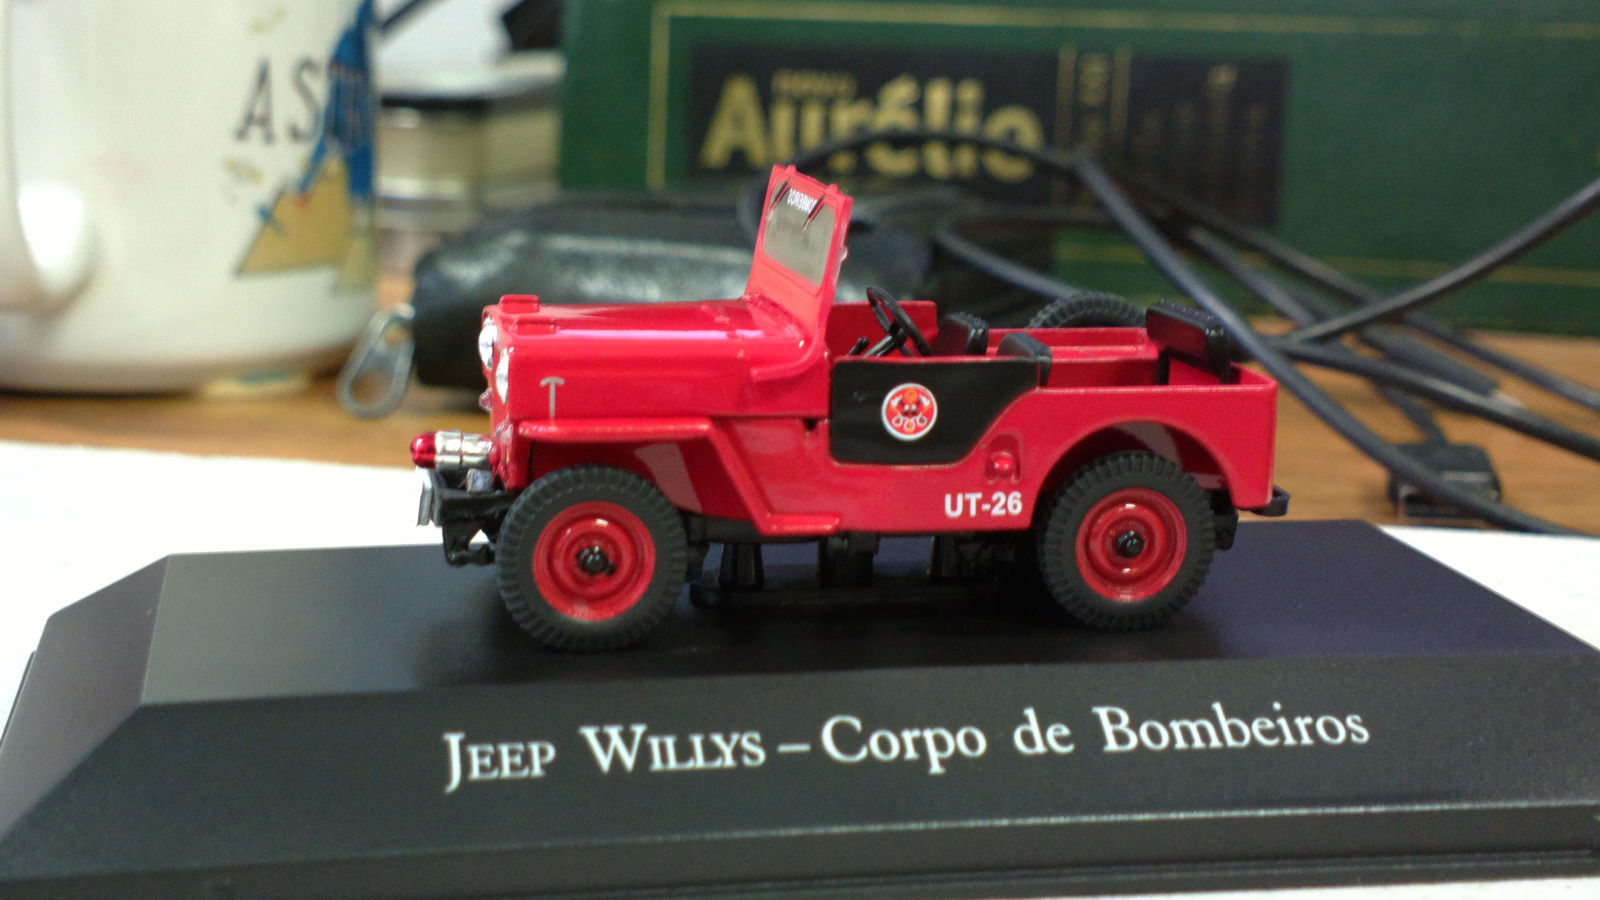 Illustration for article titled Small deAgostini HAWL - Jeep Willys Bombeiros